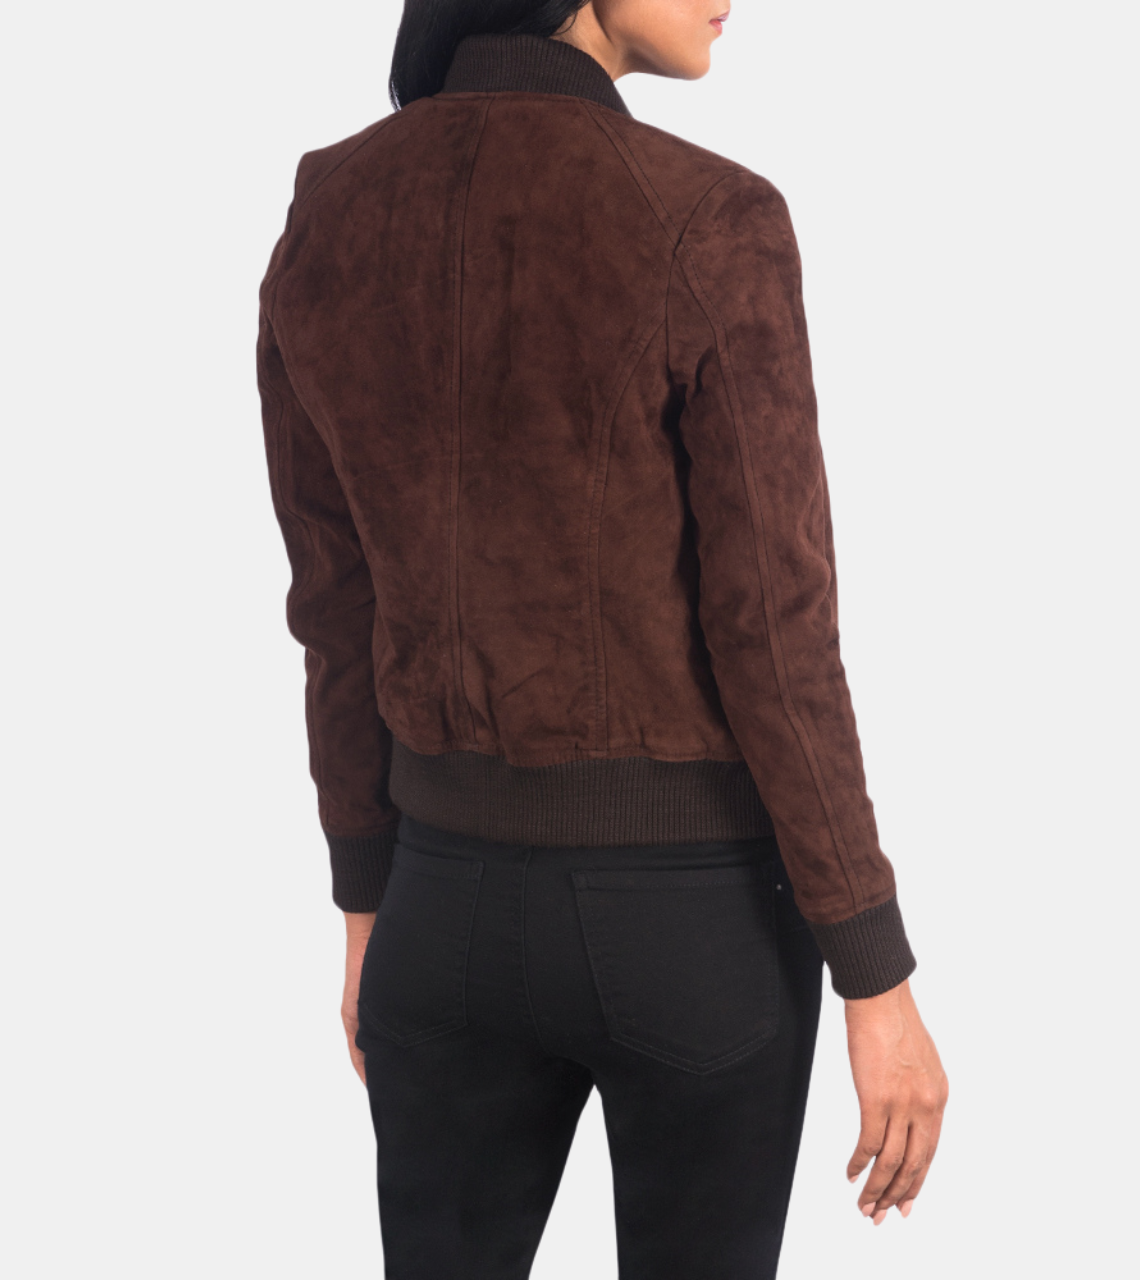 Astrella Women's Brown Bomber Suede leather Jacket Back